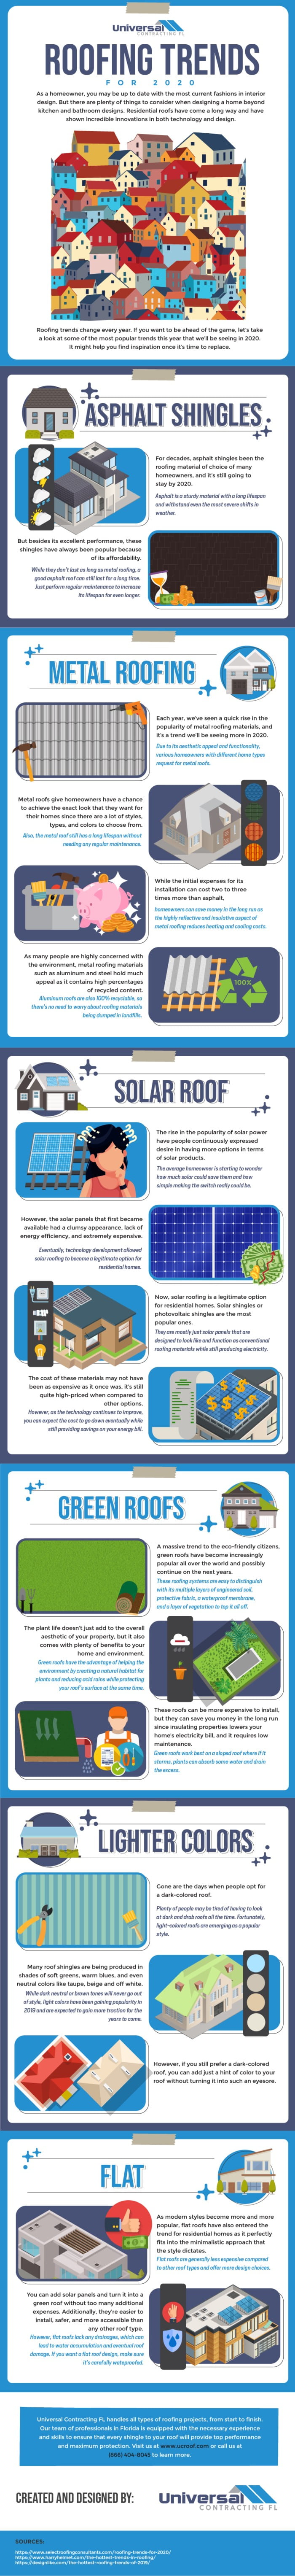 Roofing Trends for 2020 - Infographic